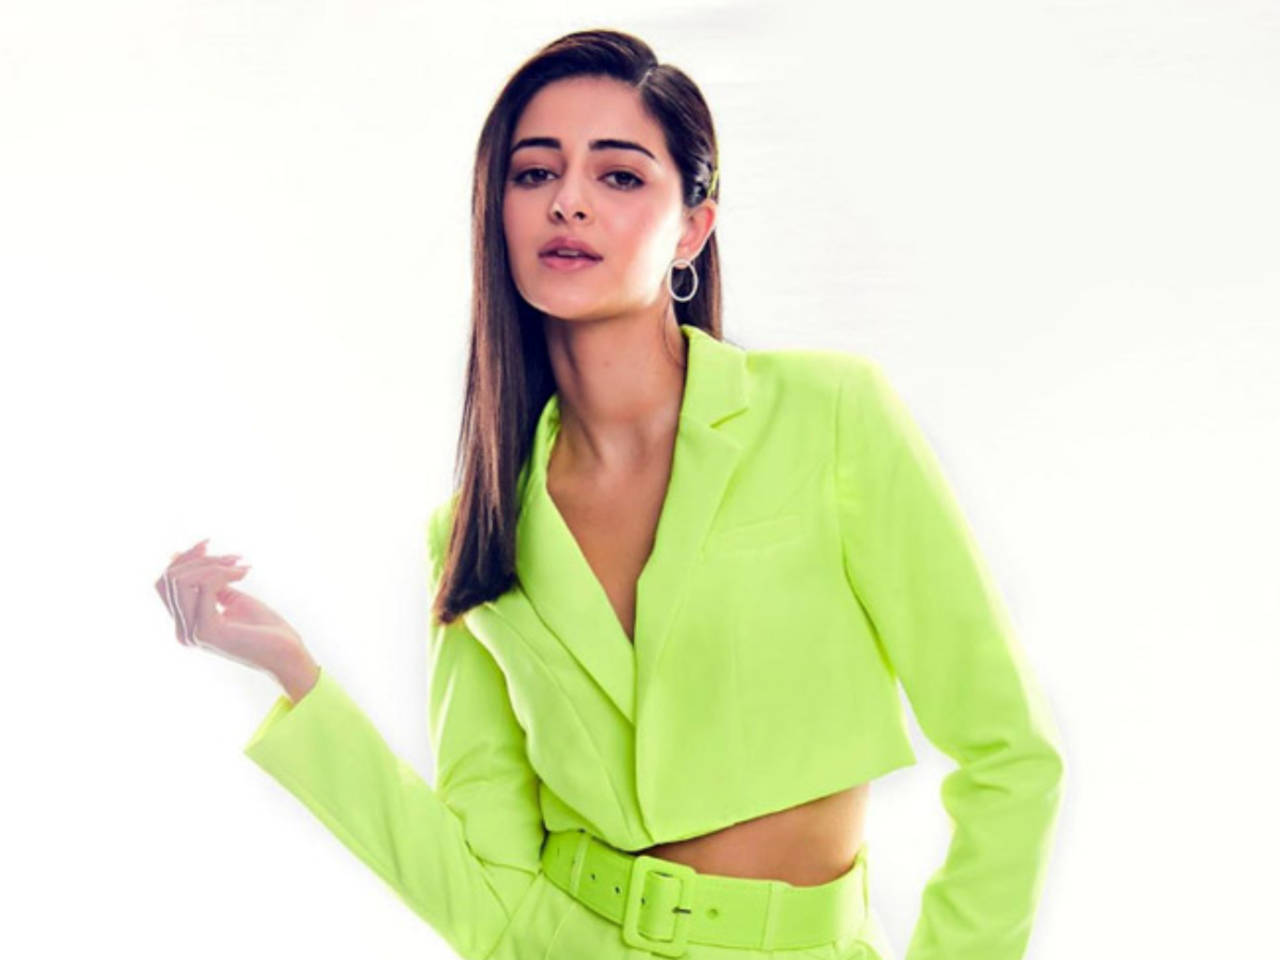 Pictures: Alia Bhatt and Ananya Panday show you how to style one